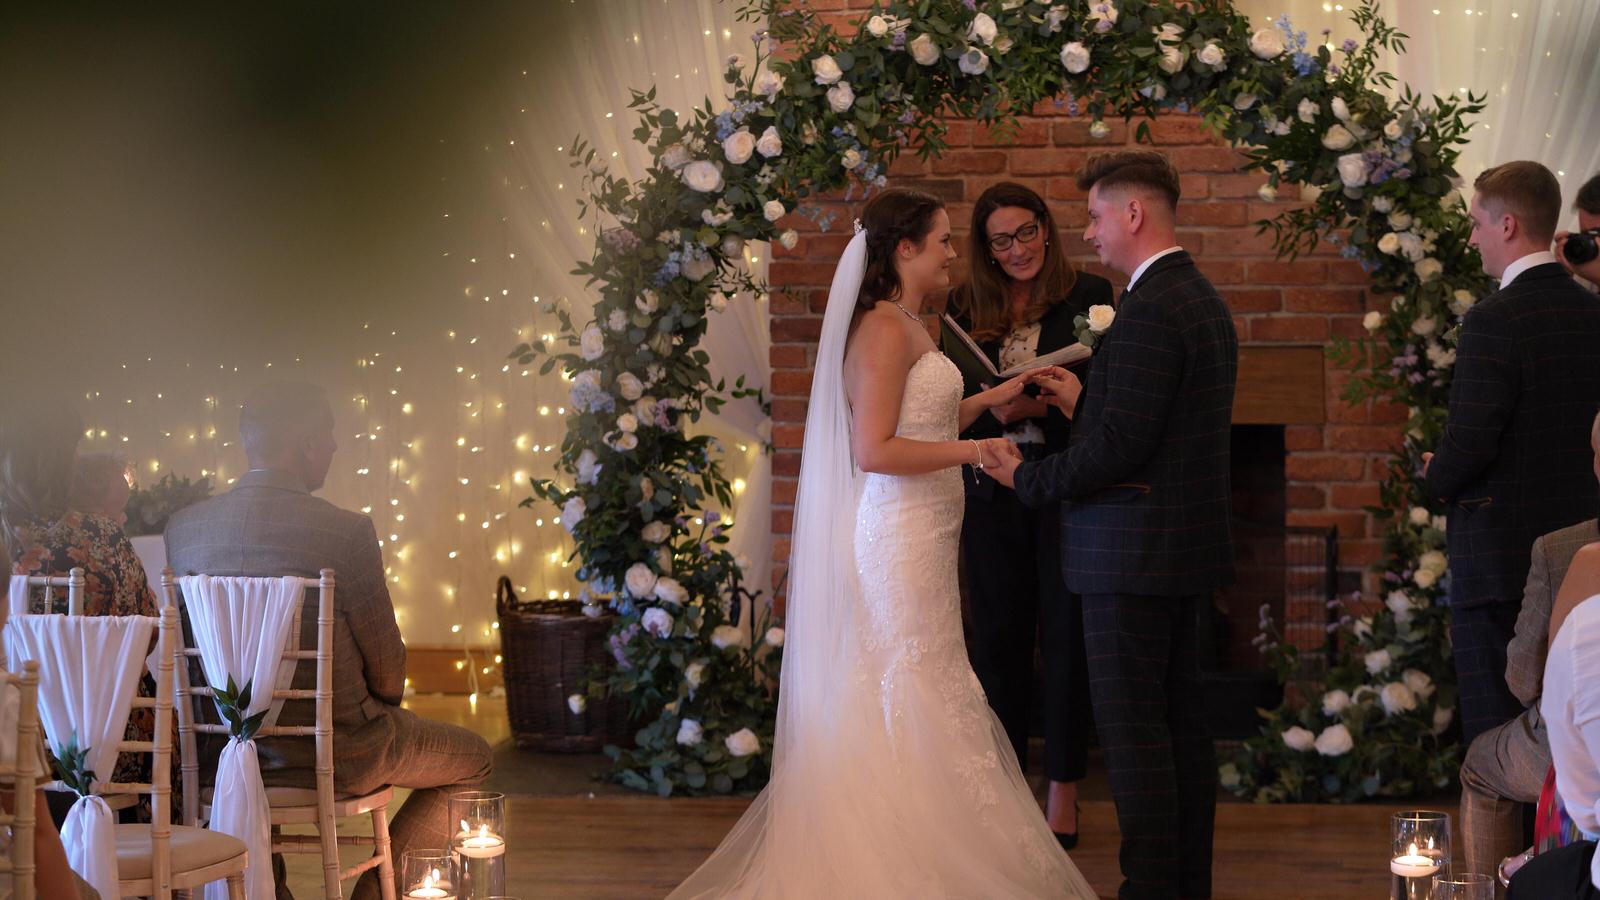 the couple exchange rings in front of a flower arch at Charnock Farm